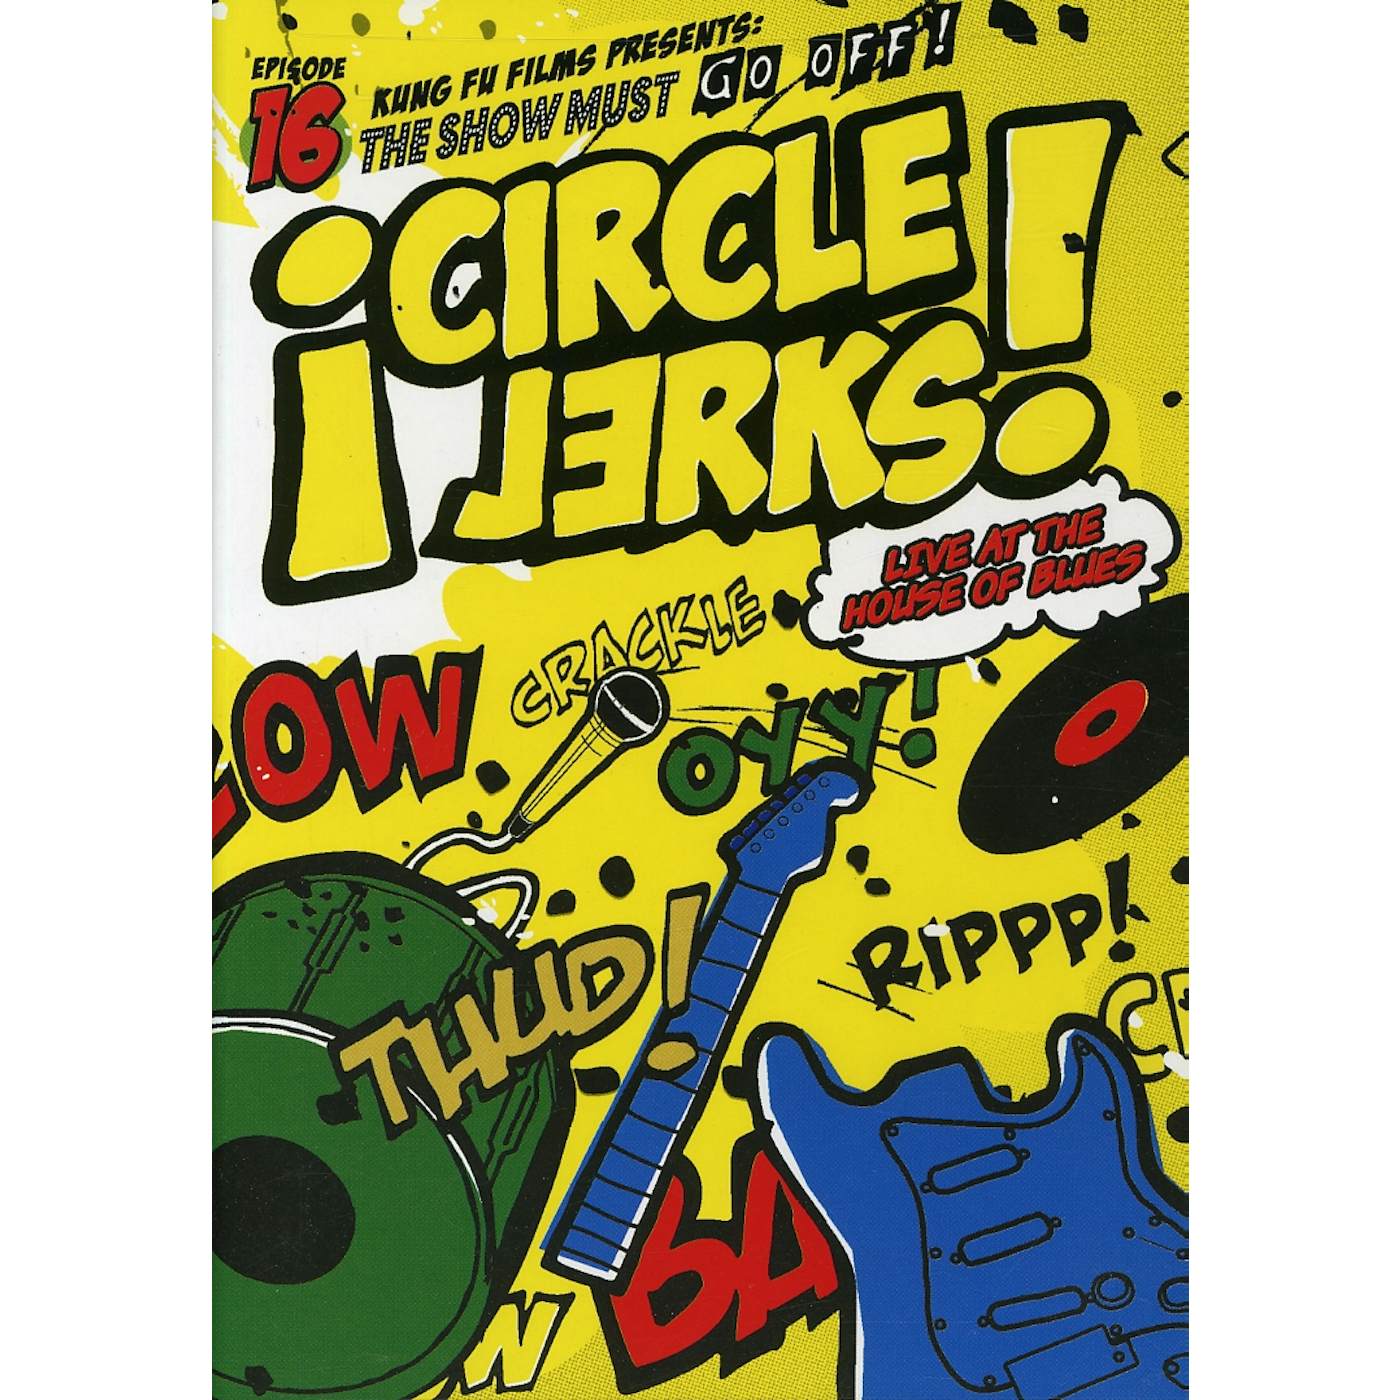 Circle Jerks LIVE AT THE HOUSE OF BLUES DVD